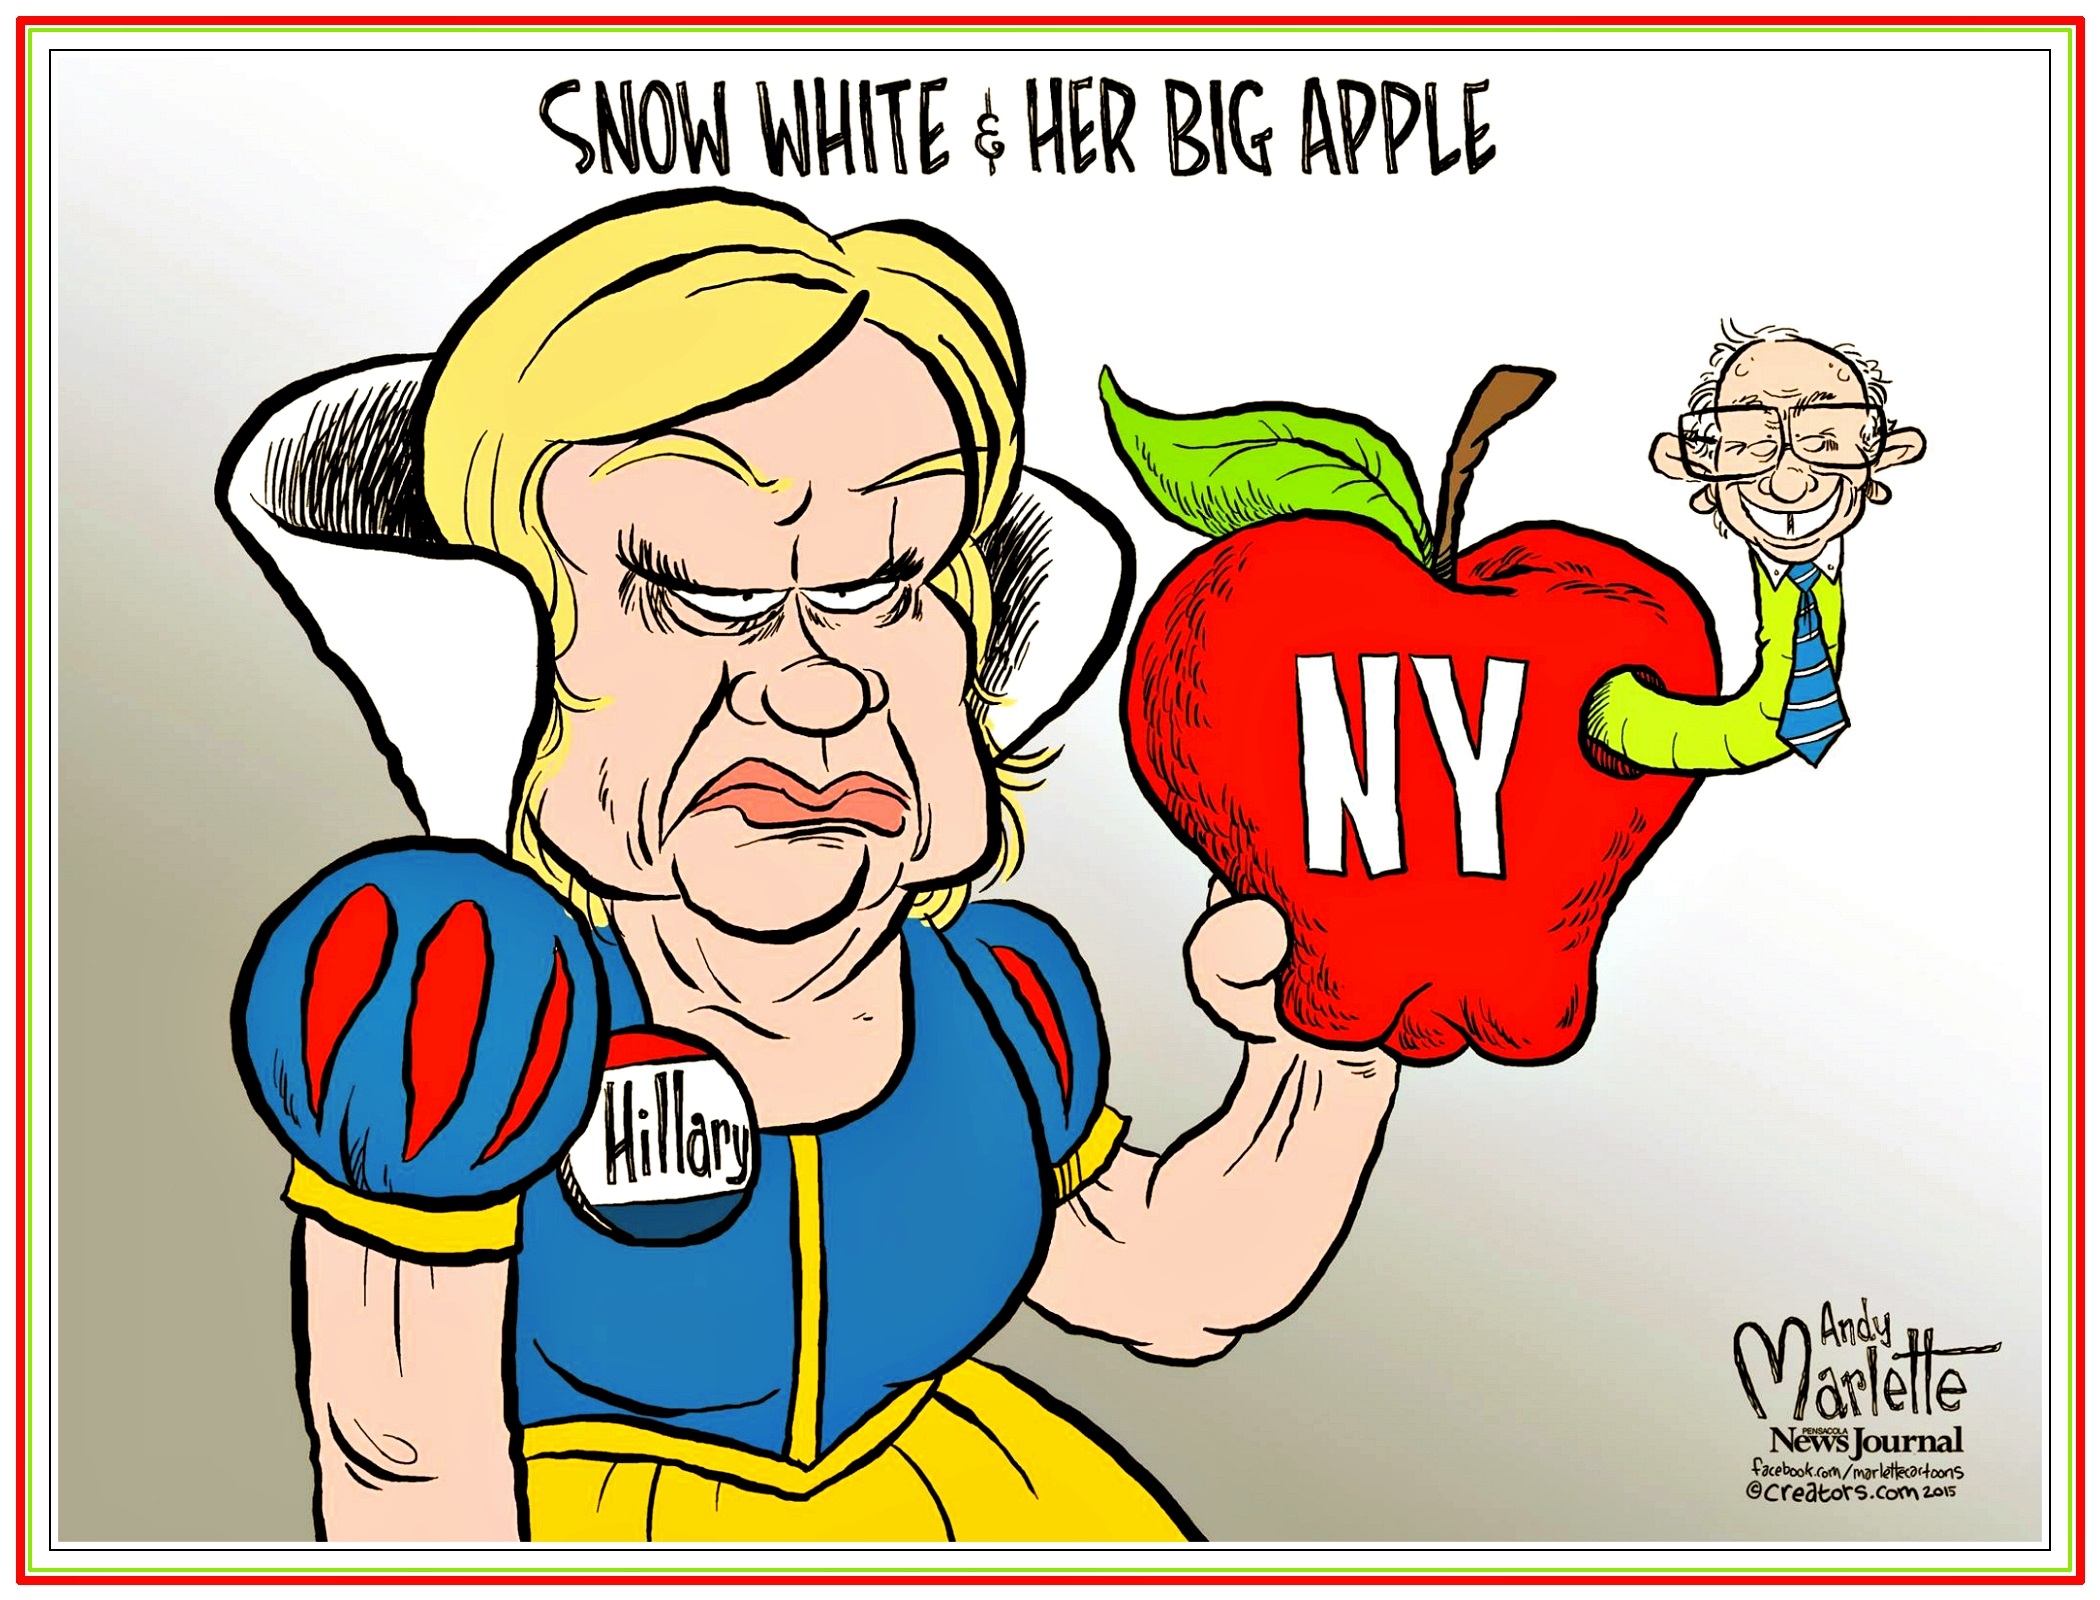 00 Andy Marlette. Snow White and Her Big Red Apple. 2016